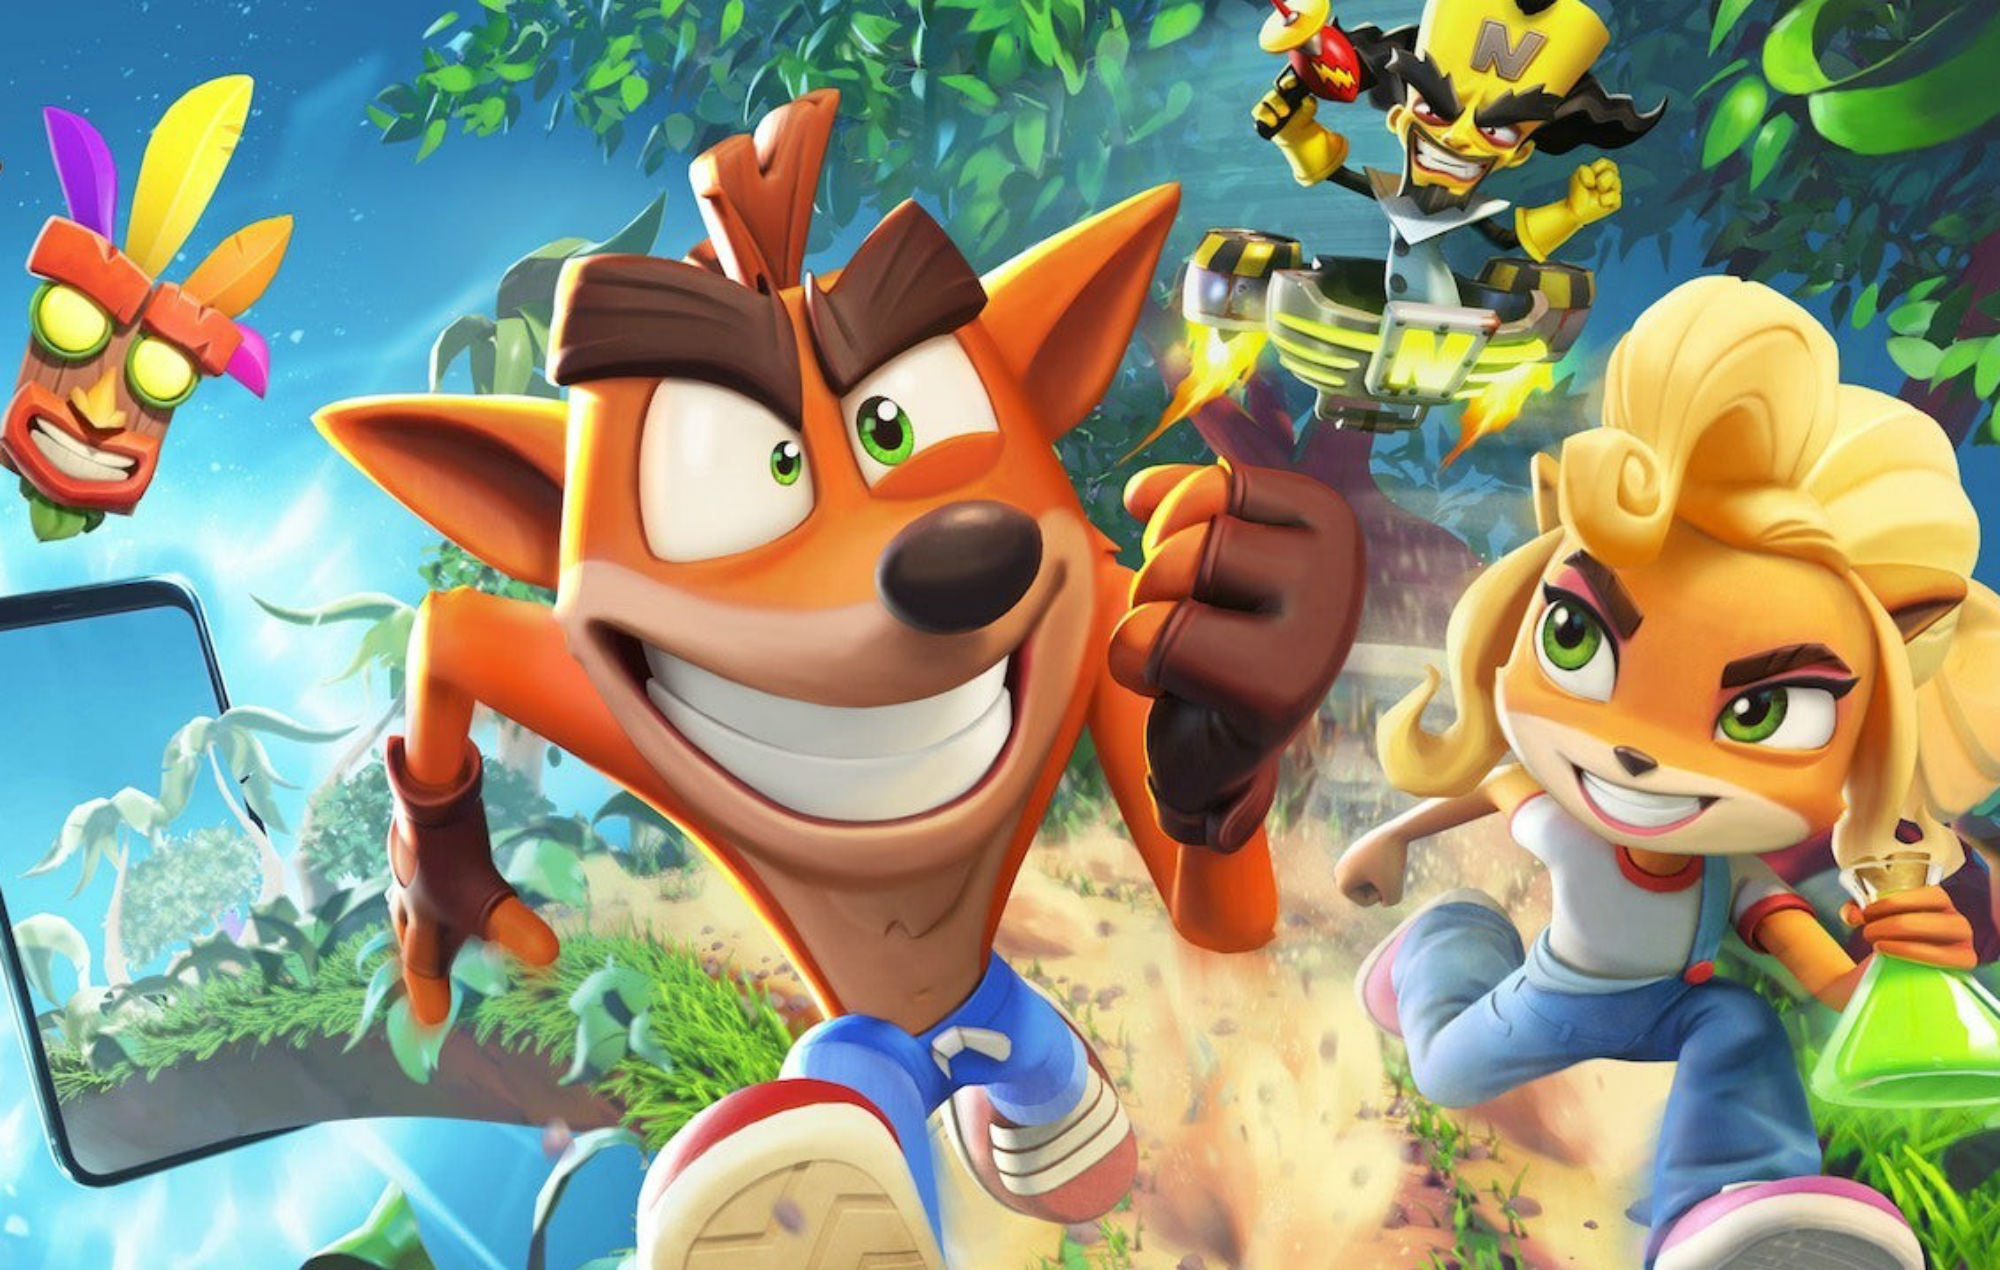 King to Release ‘Crash Bandicoot: on the Run’ to iOS and Android Soon